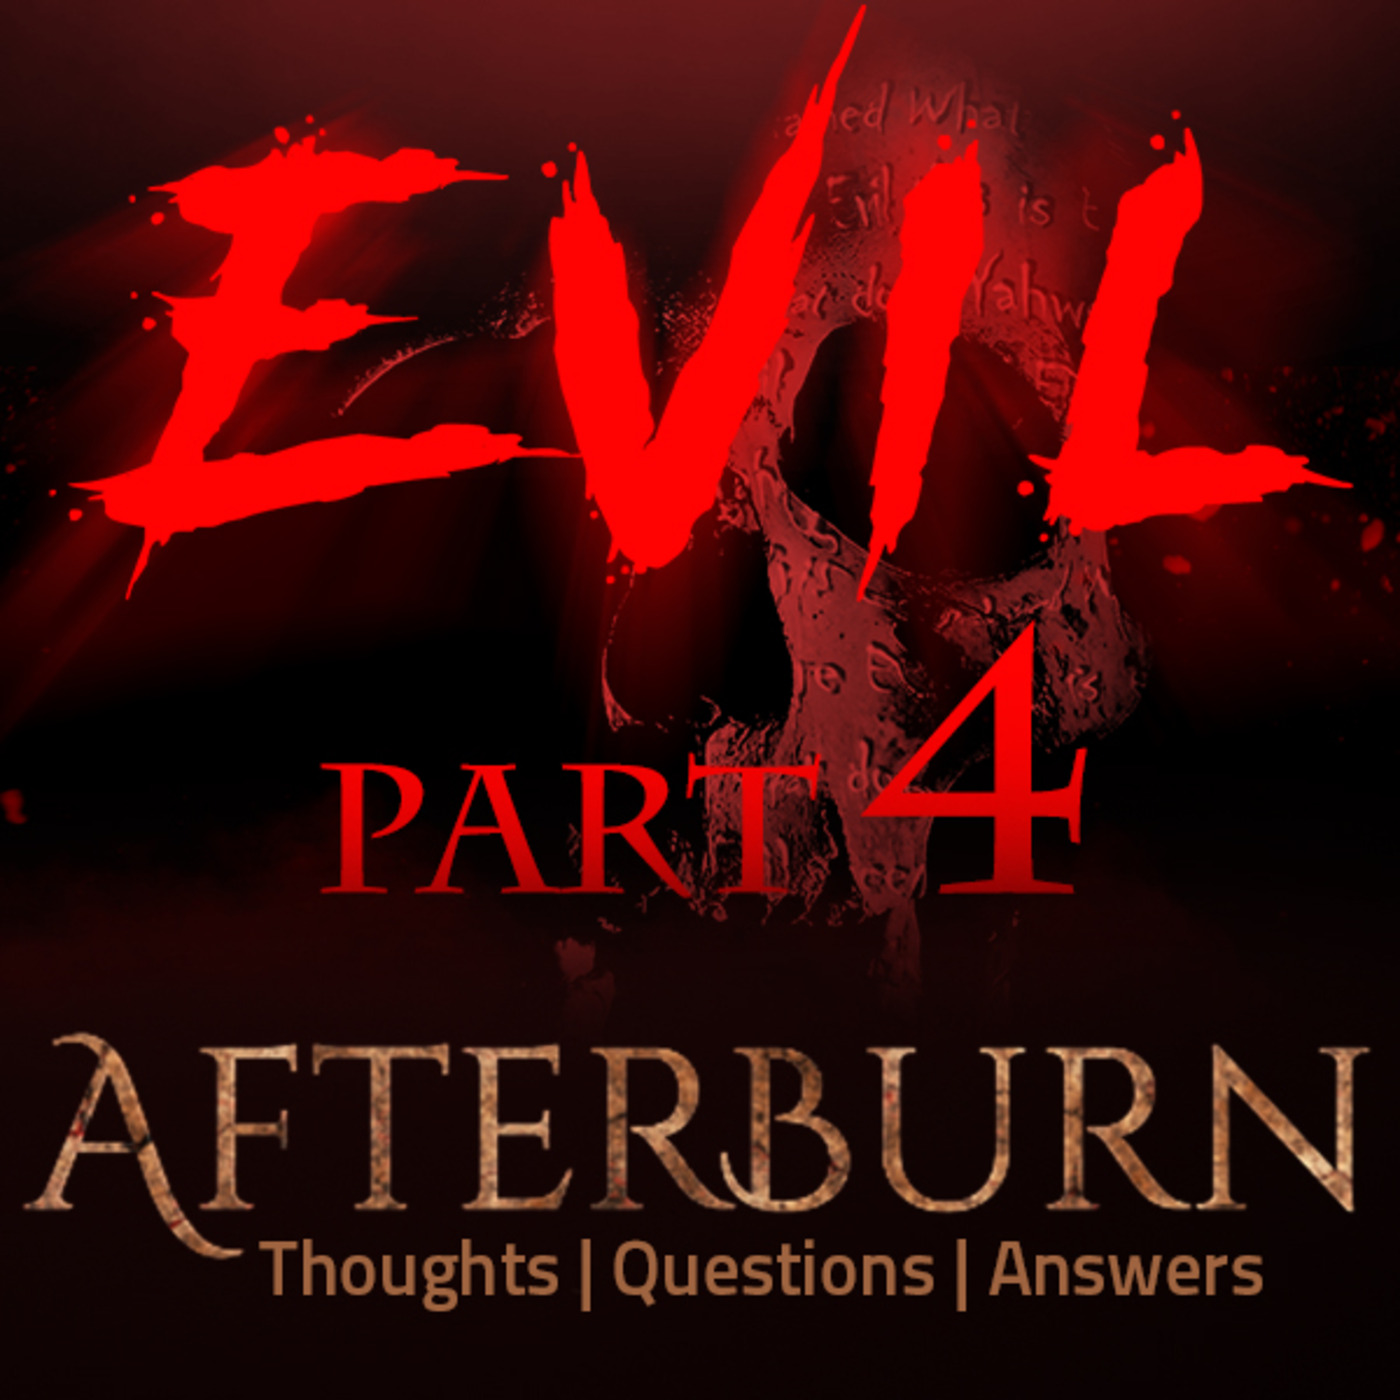 Episode 710: Afterburn | Thoughts, Q&A on Evil | Part 4